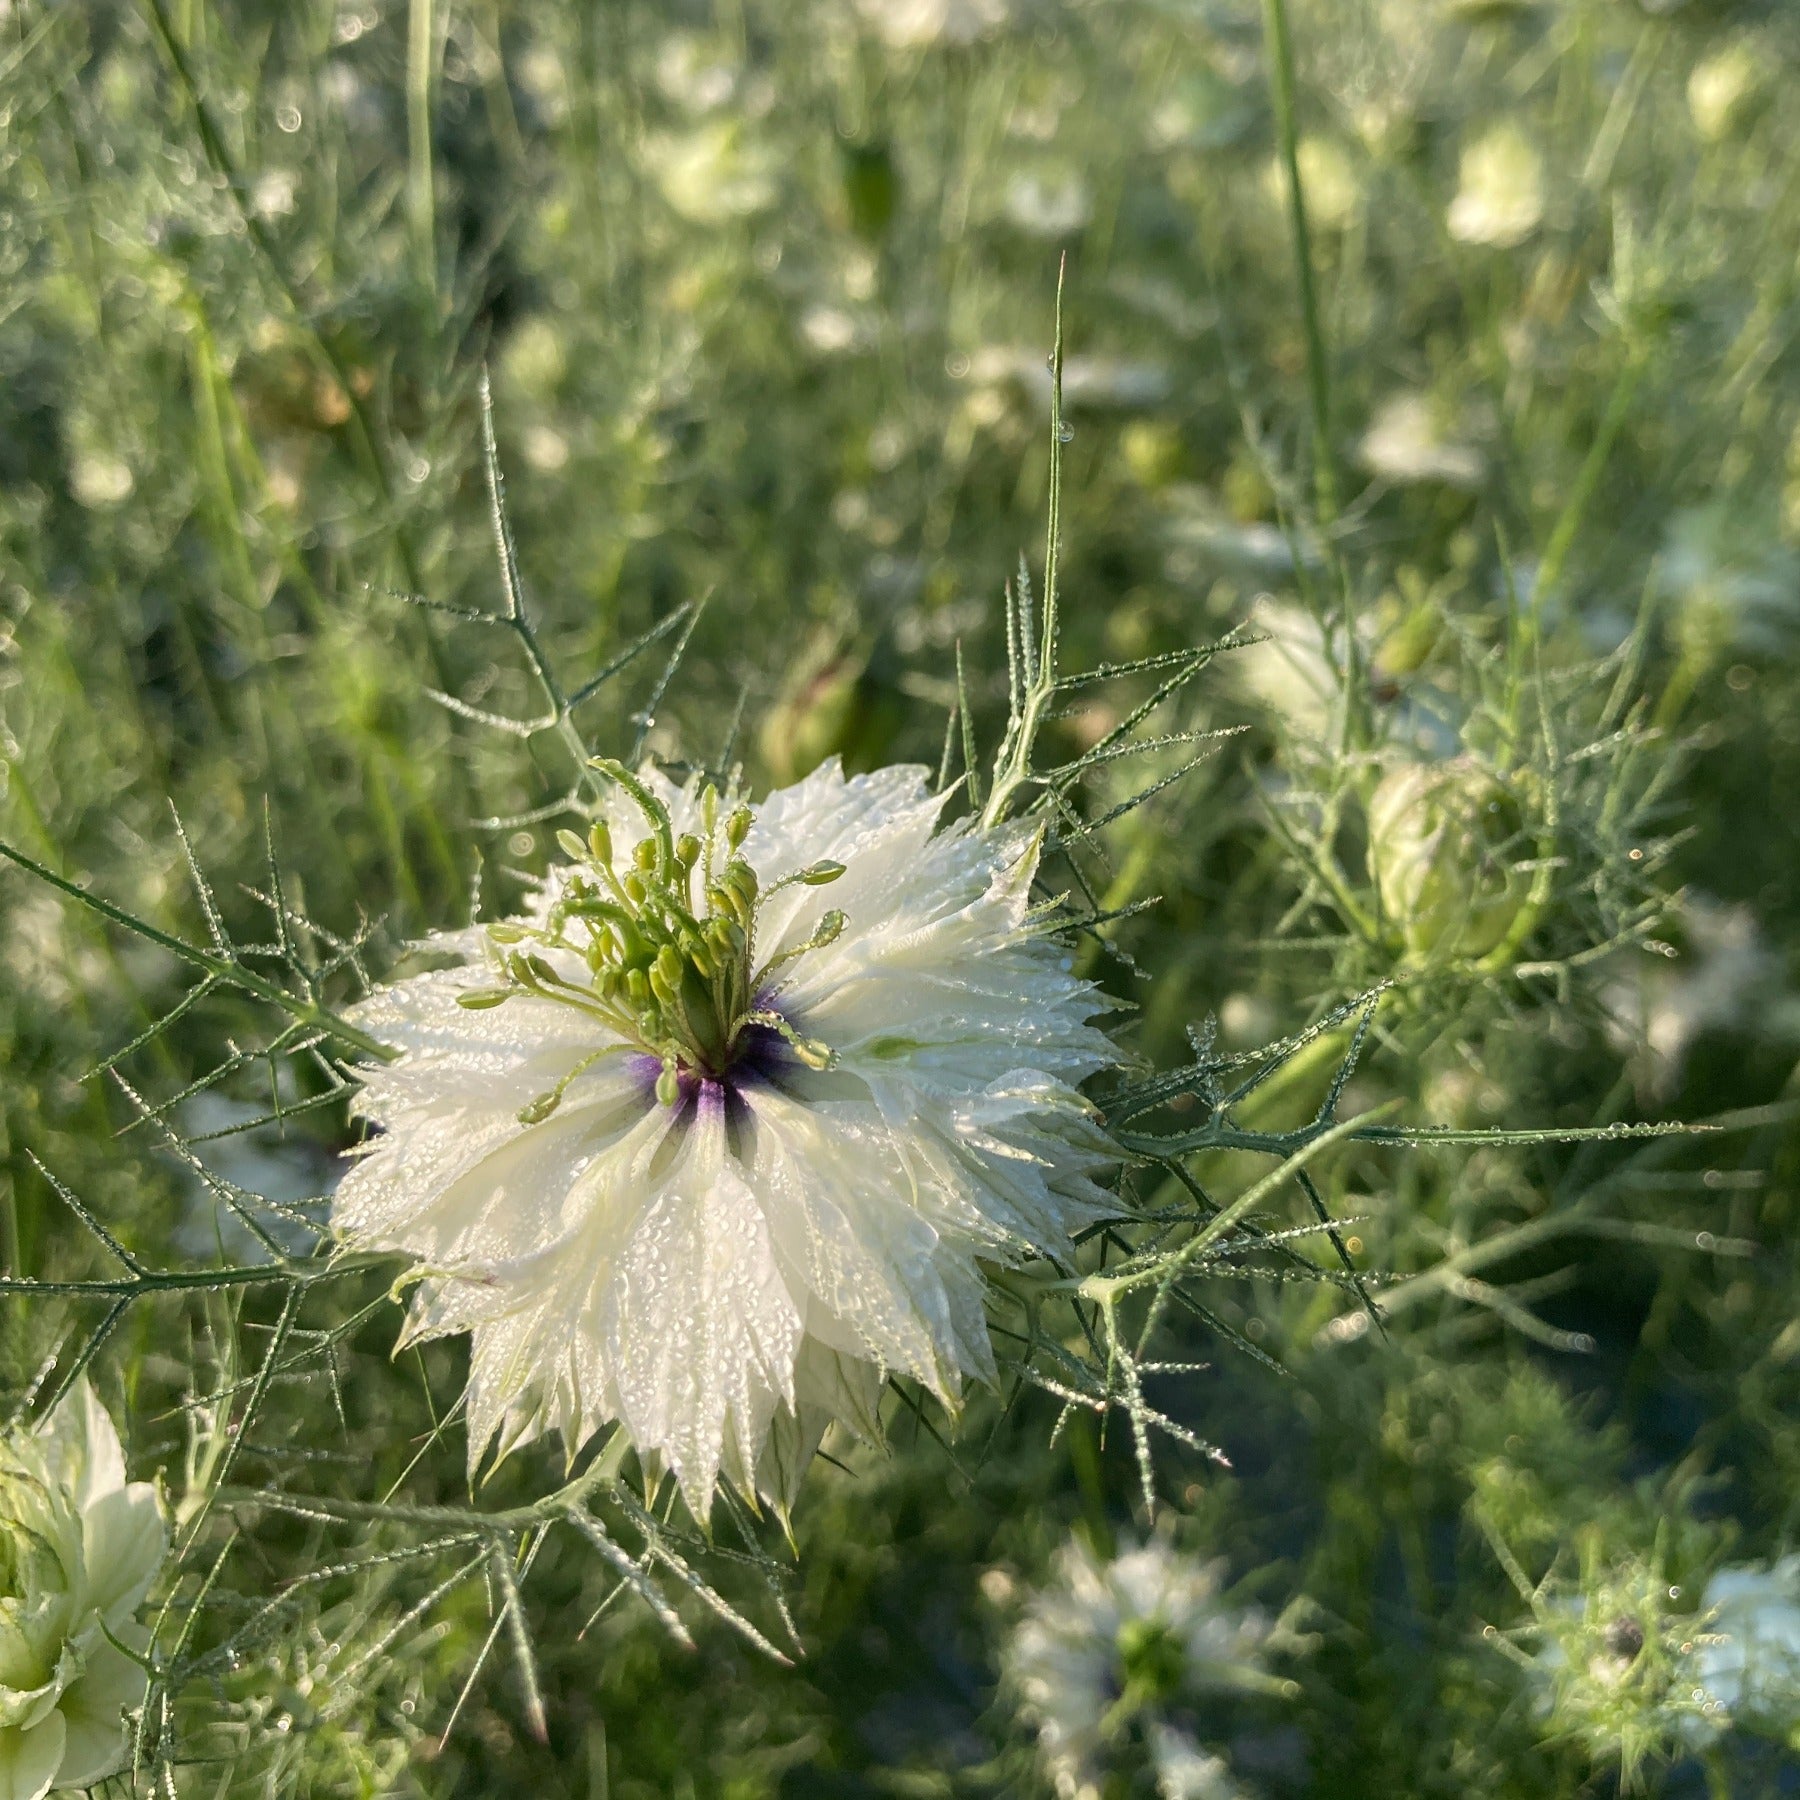 A dew covered nigella flower, also known as love-in-a-mist in a patch of nigella in the garden